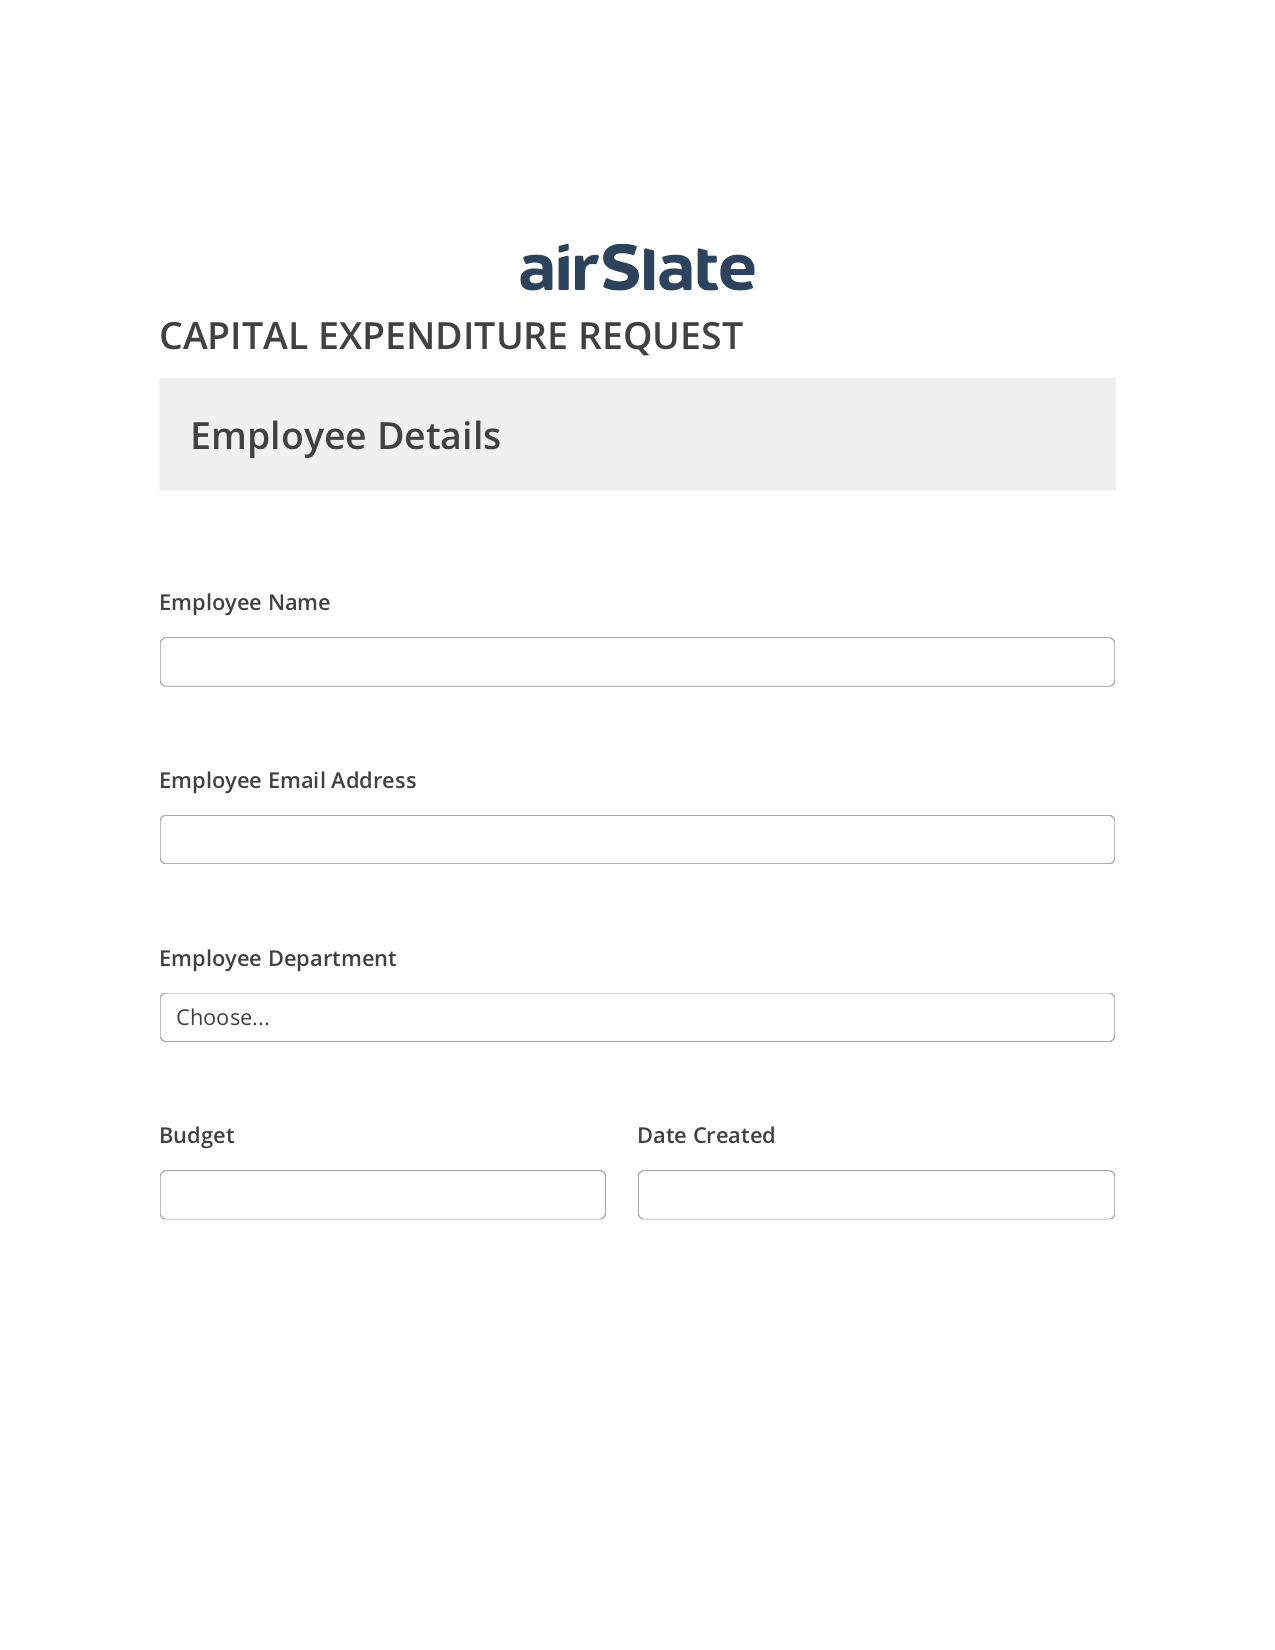 Capital Expenditure Request Approval Workflow Pre-fill from Litmos bot, Lock the Slate Bot, Archive to OneDrive